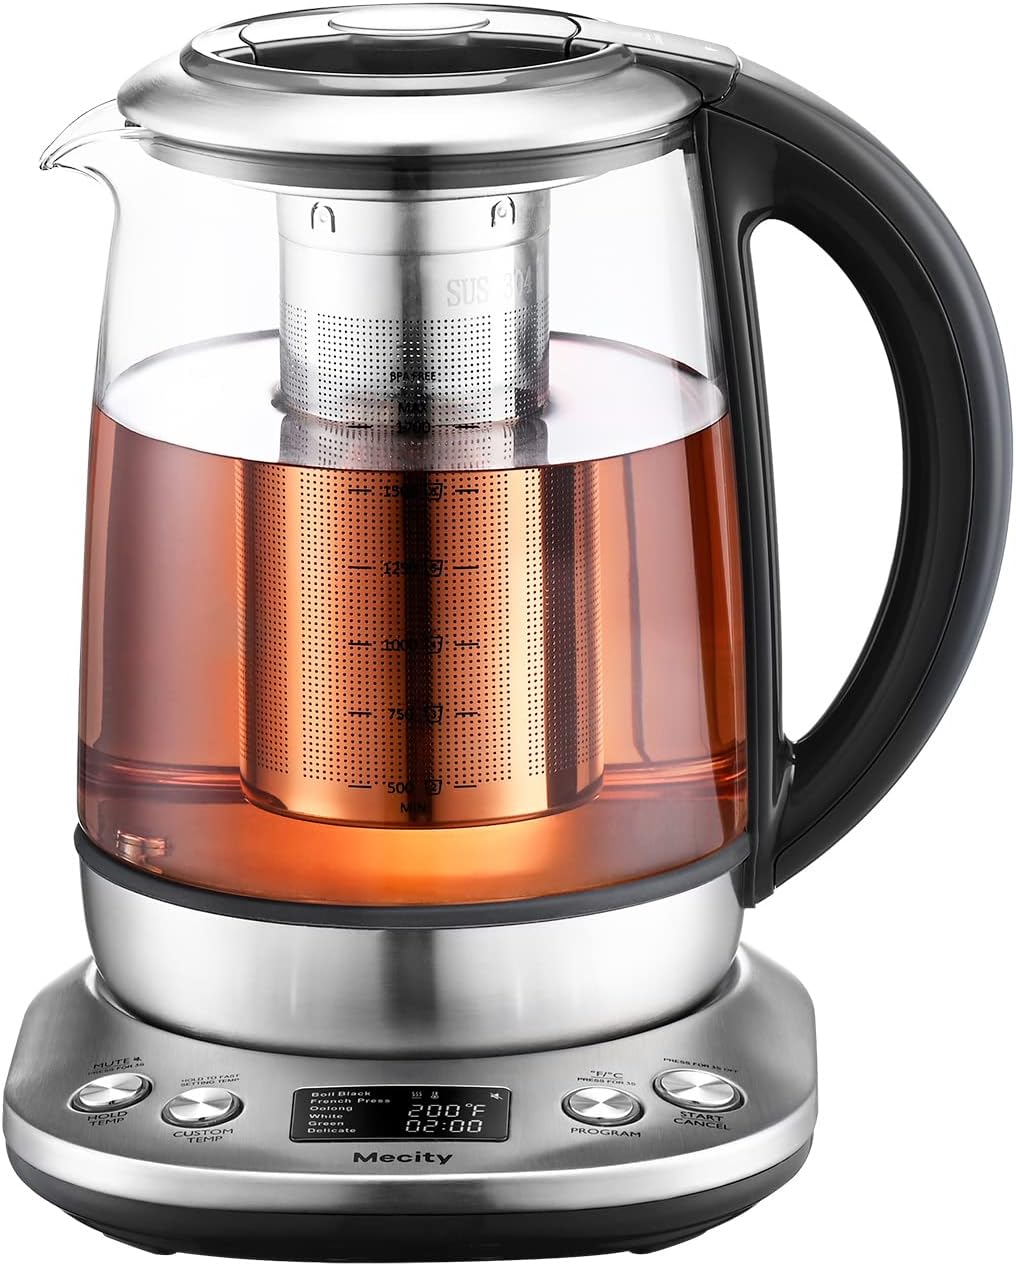 Mecity Electric Glass Tea Maker With Temperature Control and Infuser - LCD Display and Preset Brewing Programs - 1.7L Water Boiler